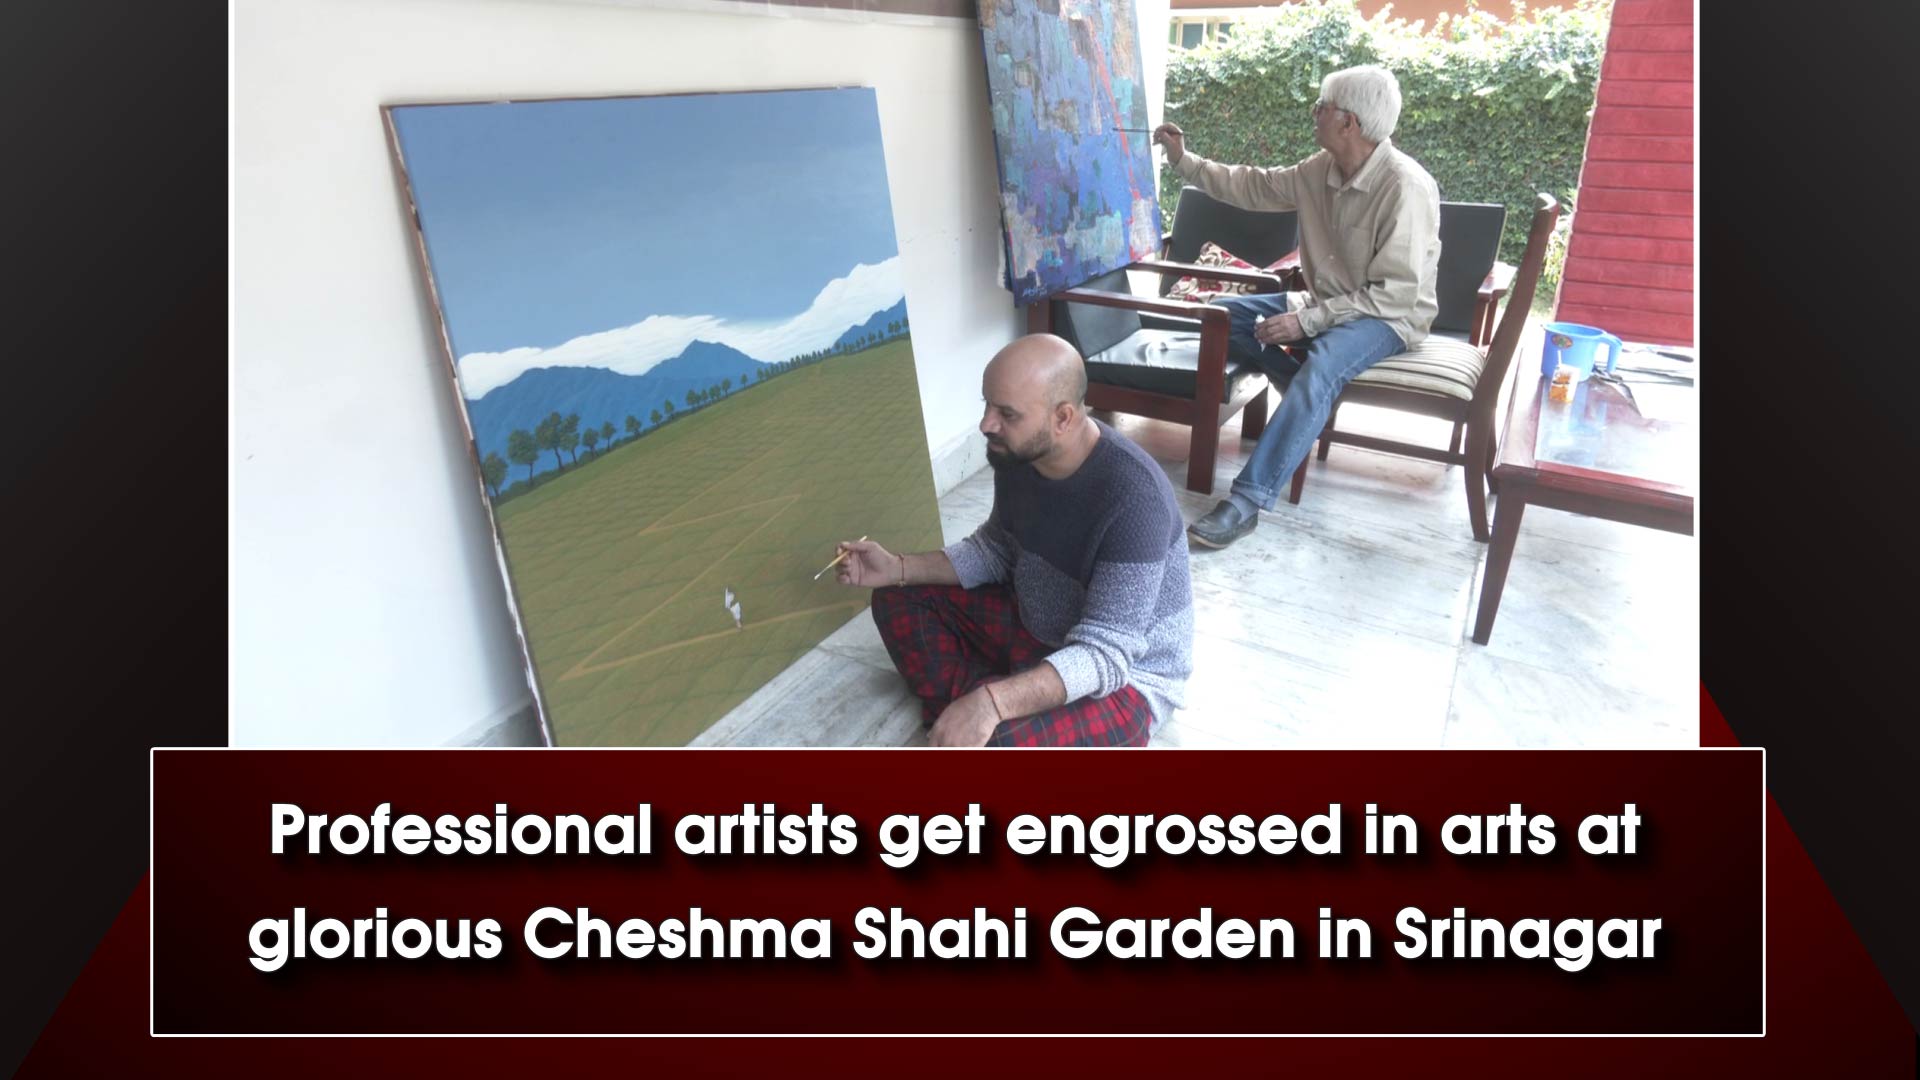 Professional artists get engrossed in arts at glorious Cheshma Shahi Garden in Srinagar